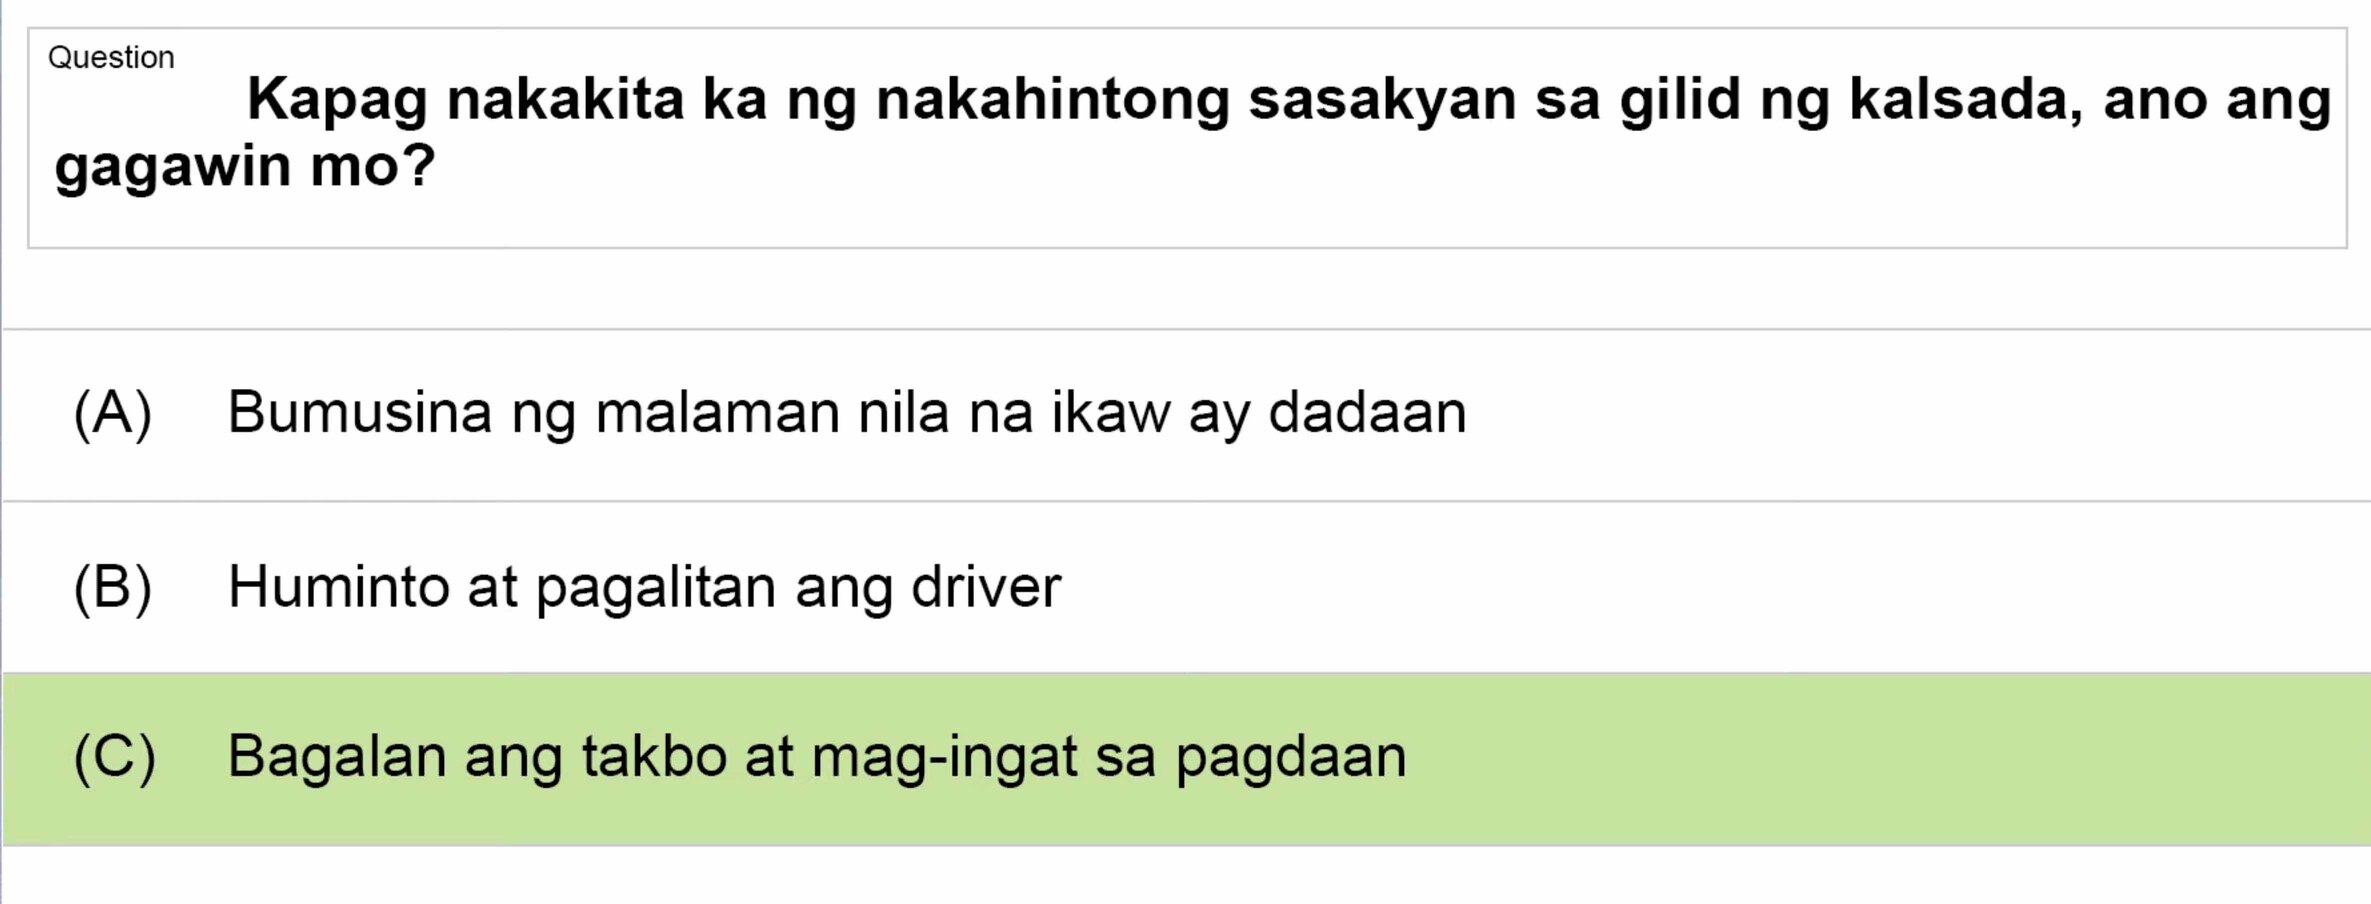 LTO Tagalog non professional exam reviewer light vehicle 3 (54)